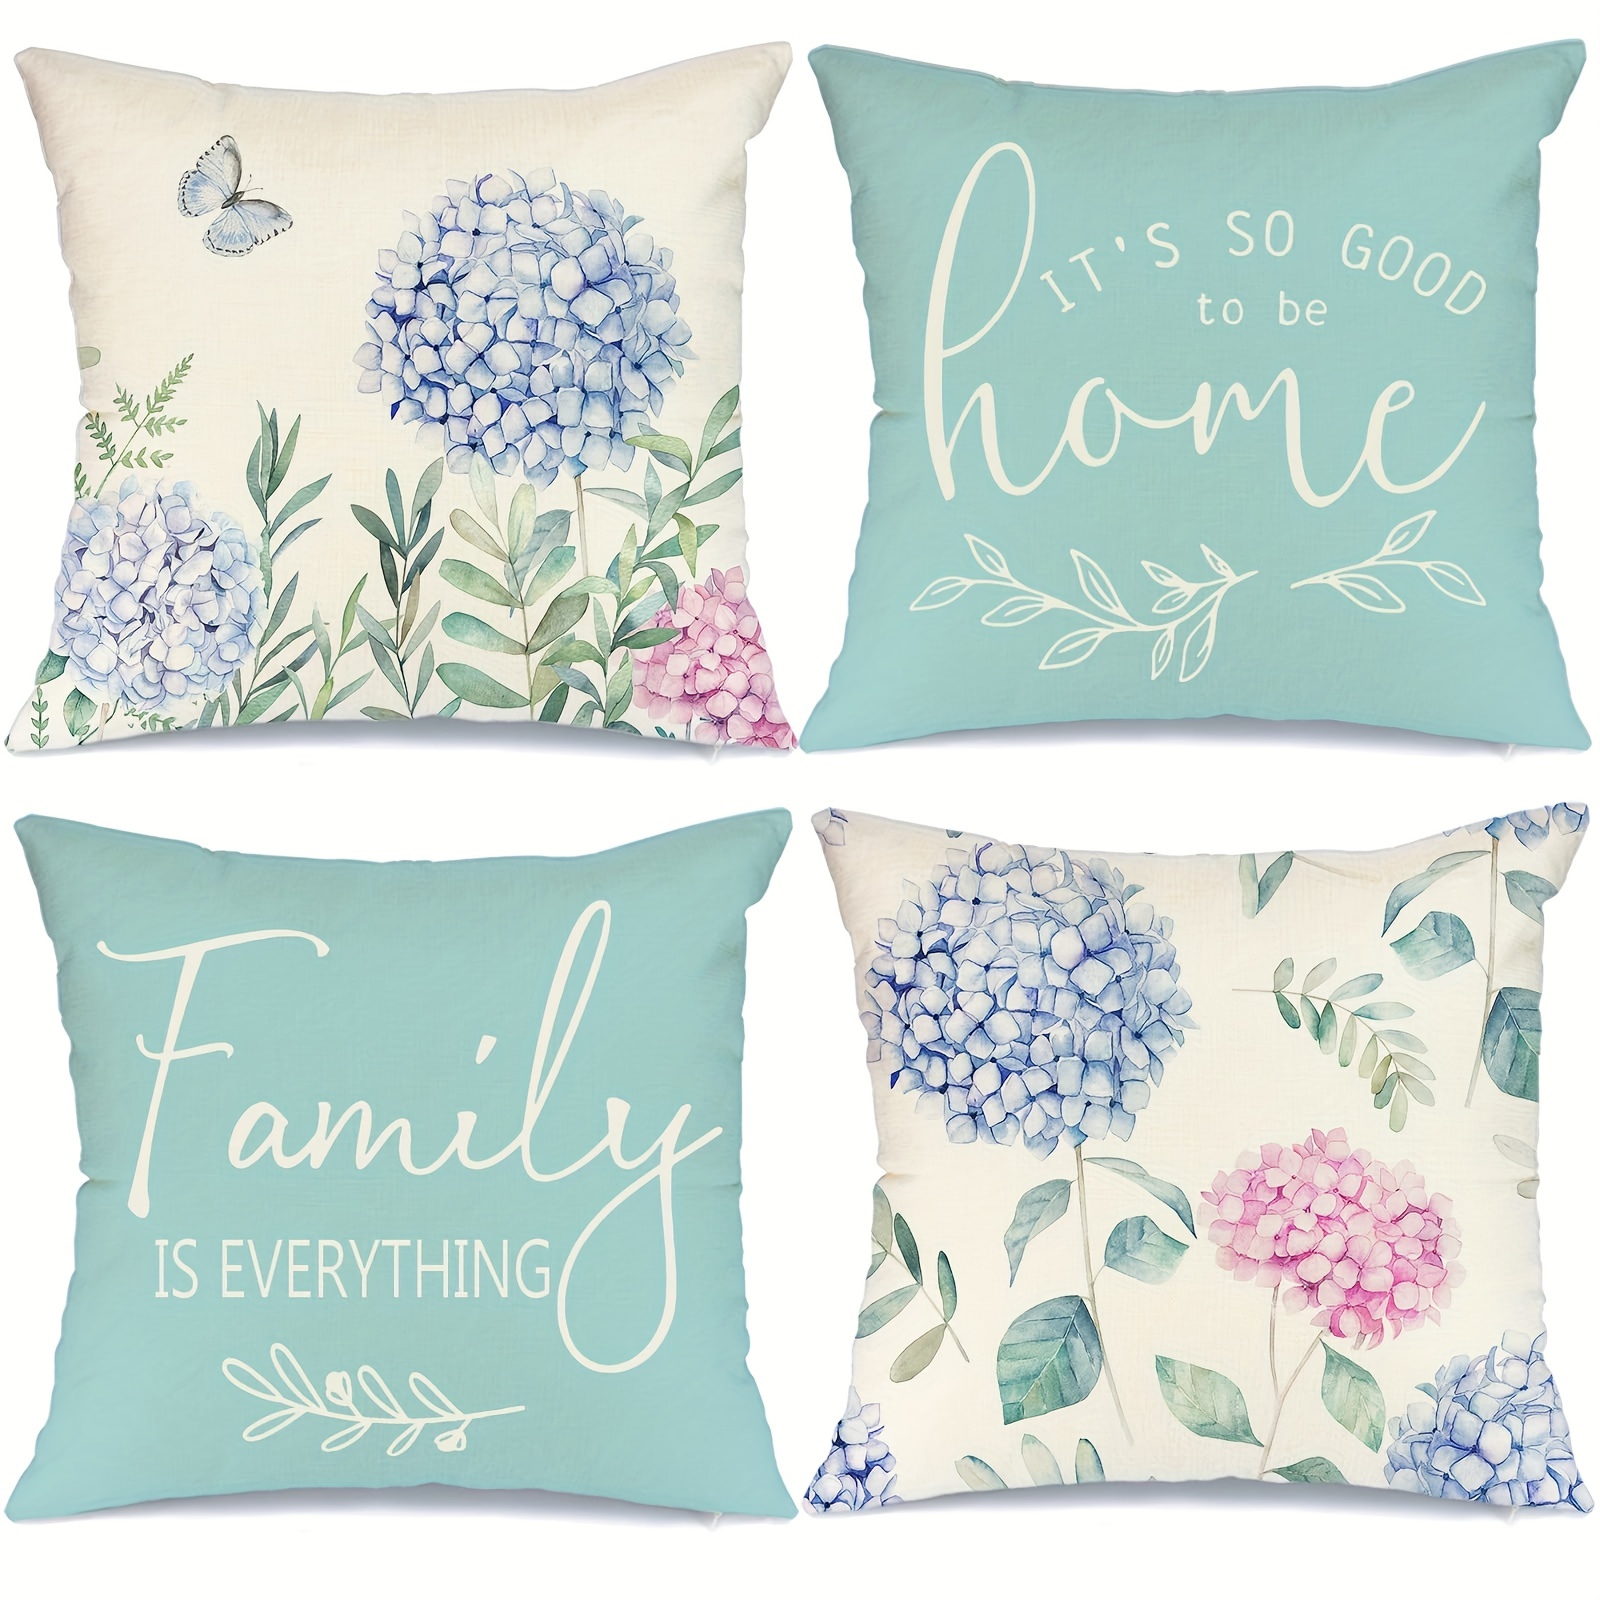 

4pcs Blue Hydrangea Linen Blend Throw Pillow Covers, Cushion Cover For Bed Sofa Couch Living Room Decor Home Decor, No Pillow Insert, 18inch*18inch